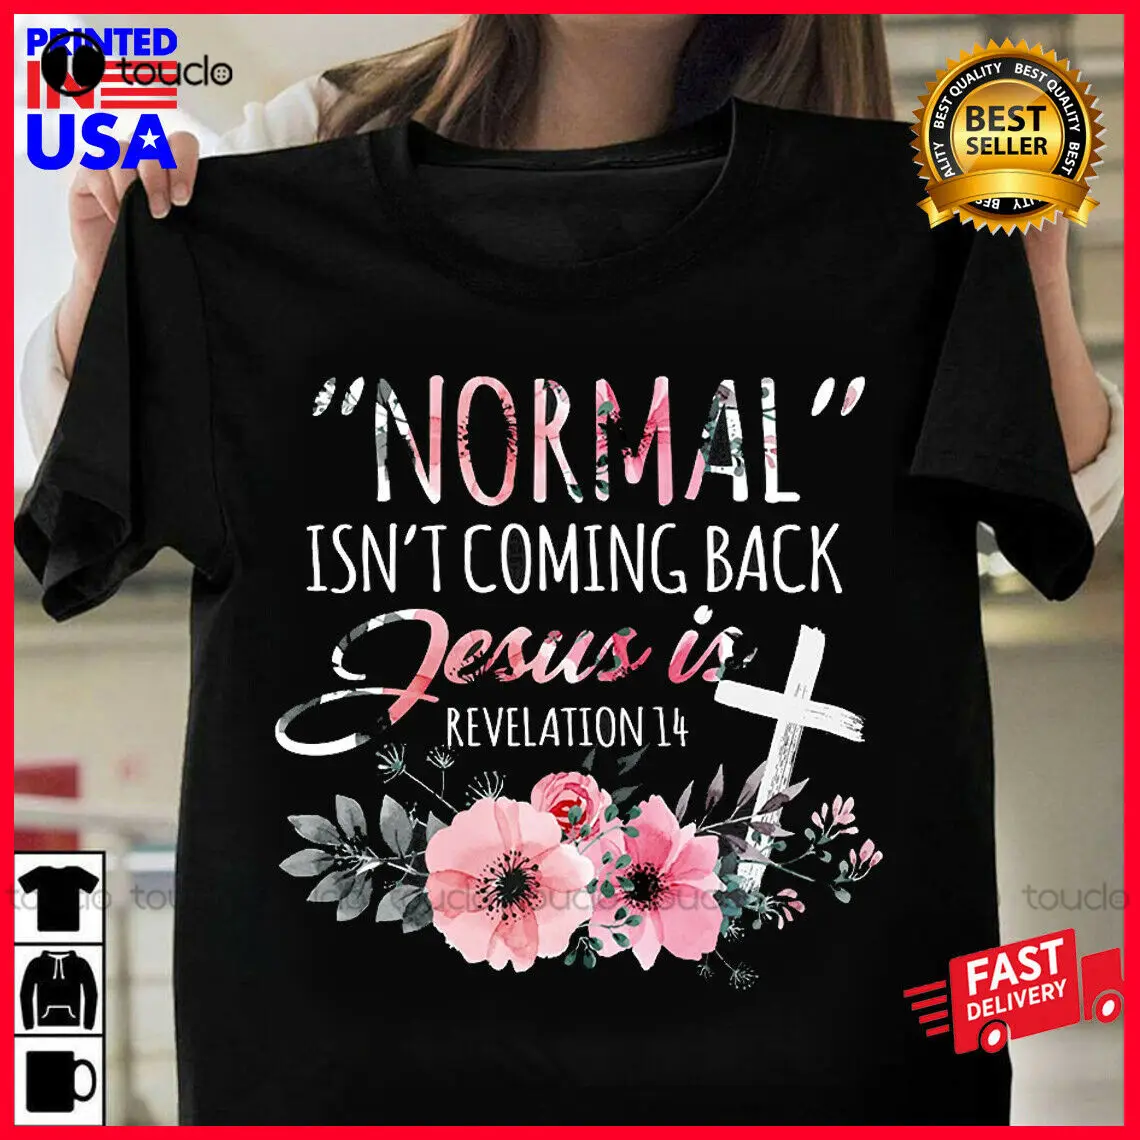 

Normal Isn'T Coming Back But Jesus Is Revelation 14 Flower T Shirt Short Sleeves Shirts For Women Christmas Gift Xs-5Xl Xs-5Xl